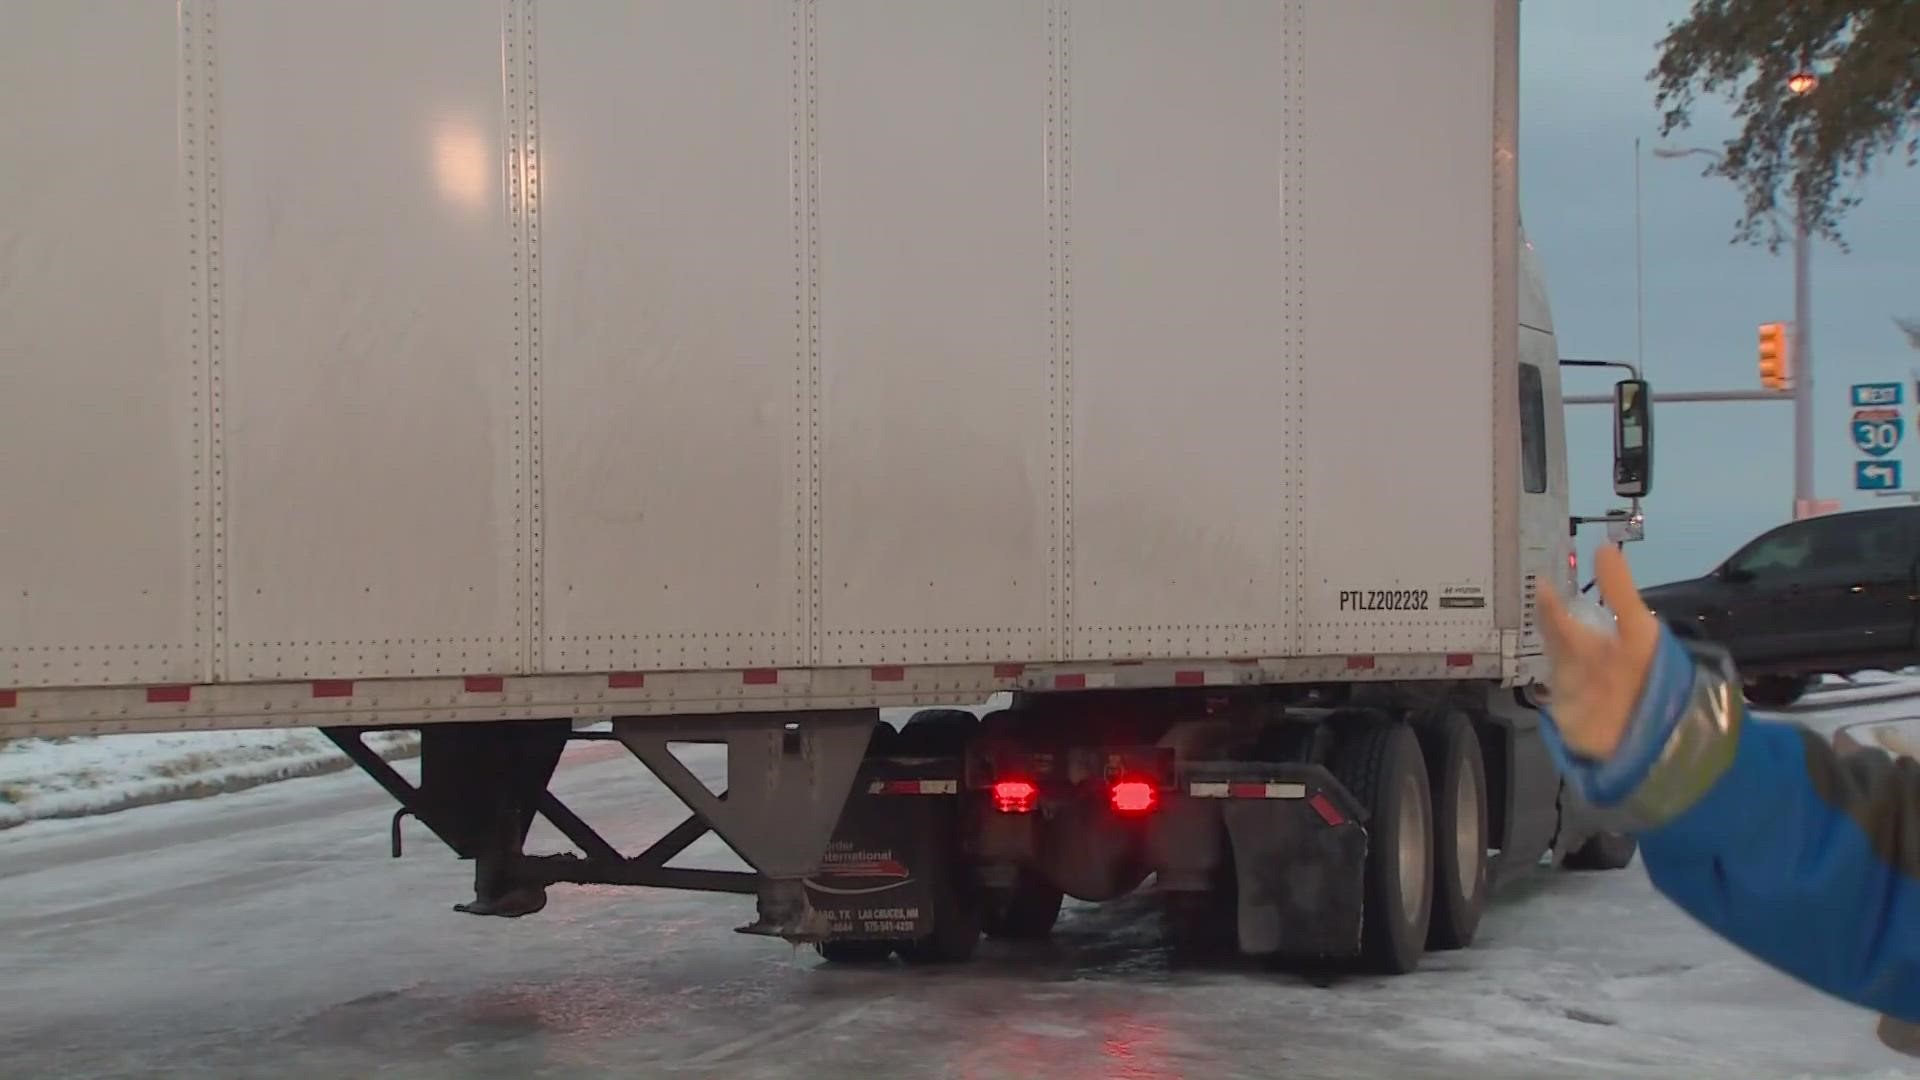 WFAA reporter Megan Mitchell gives tips on handling icy roads as a stuck 18-wheeler causes traffic in the Fort Worth area.